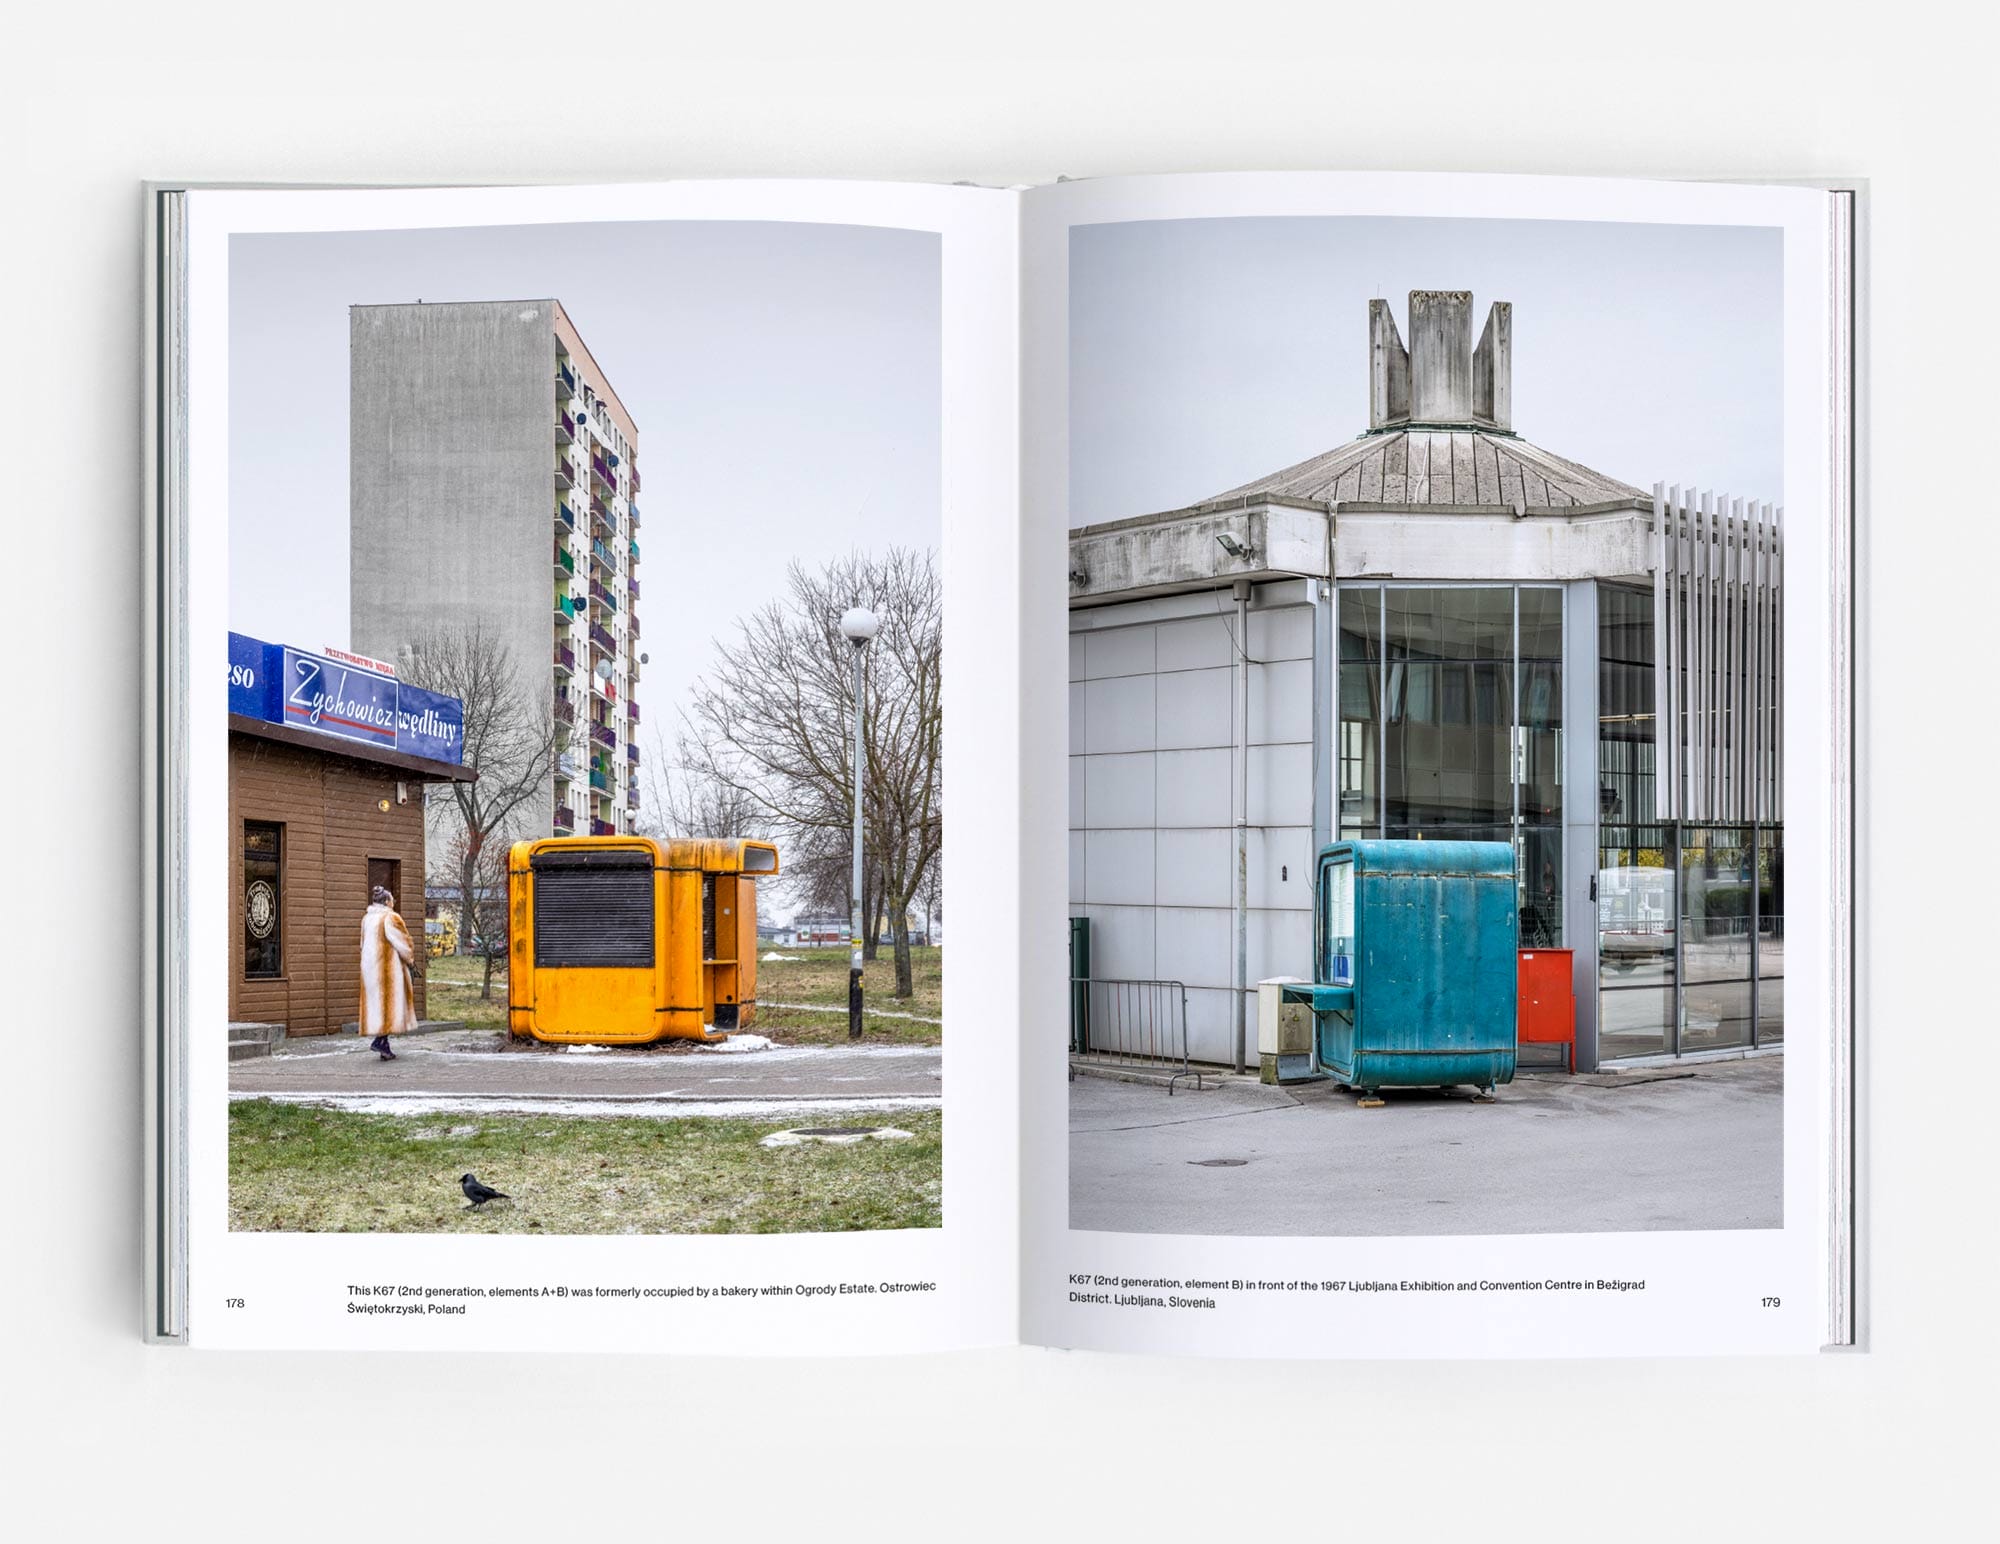 a spread from the book 'Kiosk' showing two photographs side-by-side of modernist kiosks, one yellow and one turquoise, foregrounding other Soviet-era buildings